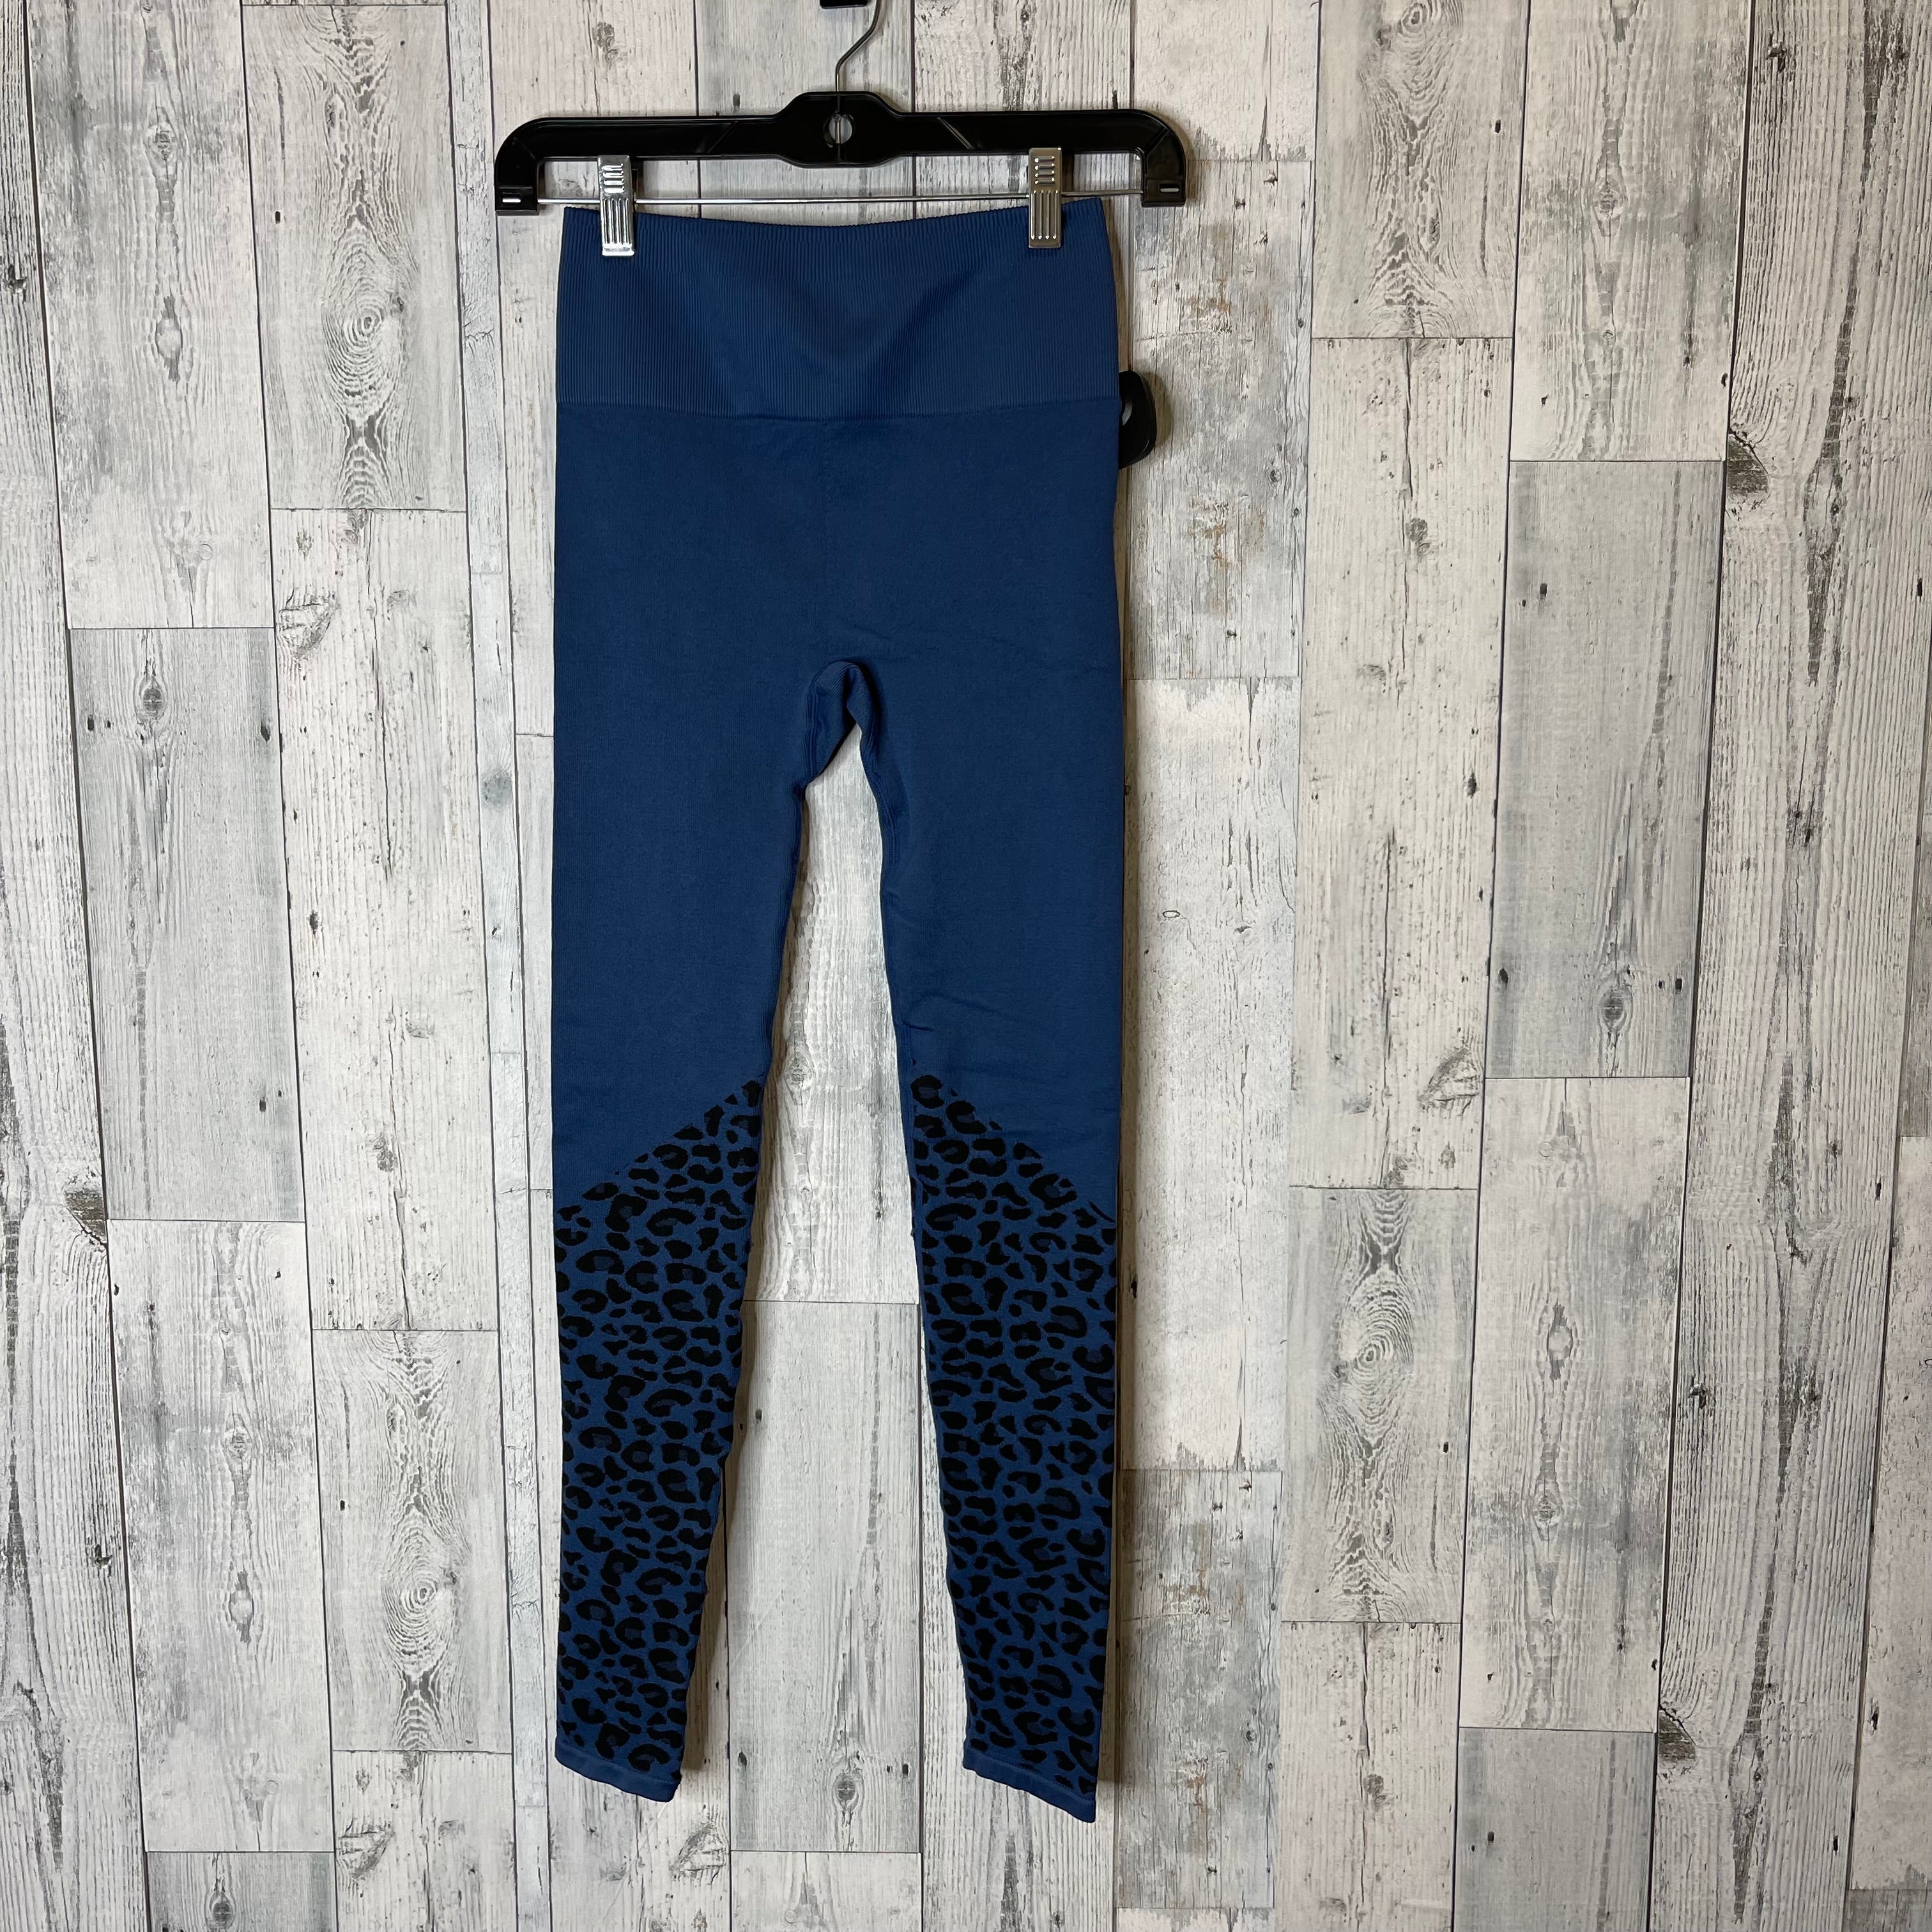 Buy 17.59 usd for Athletic Leggings By Fabletics Size: Xs Browse now